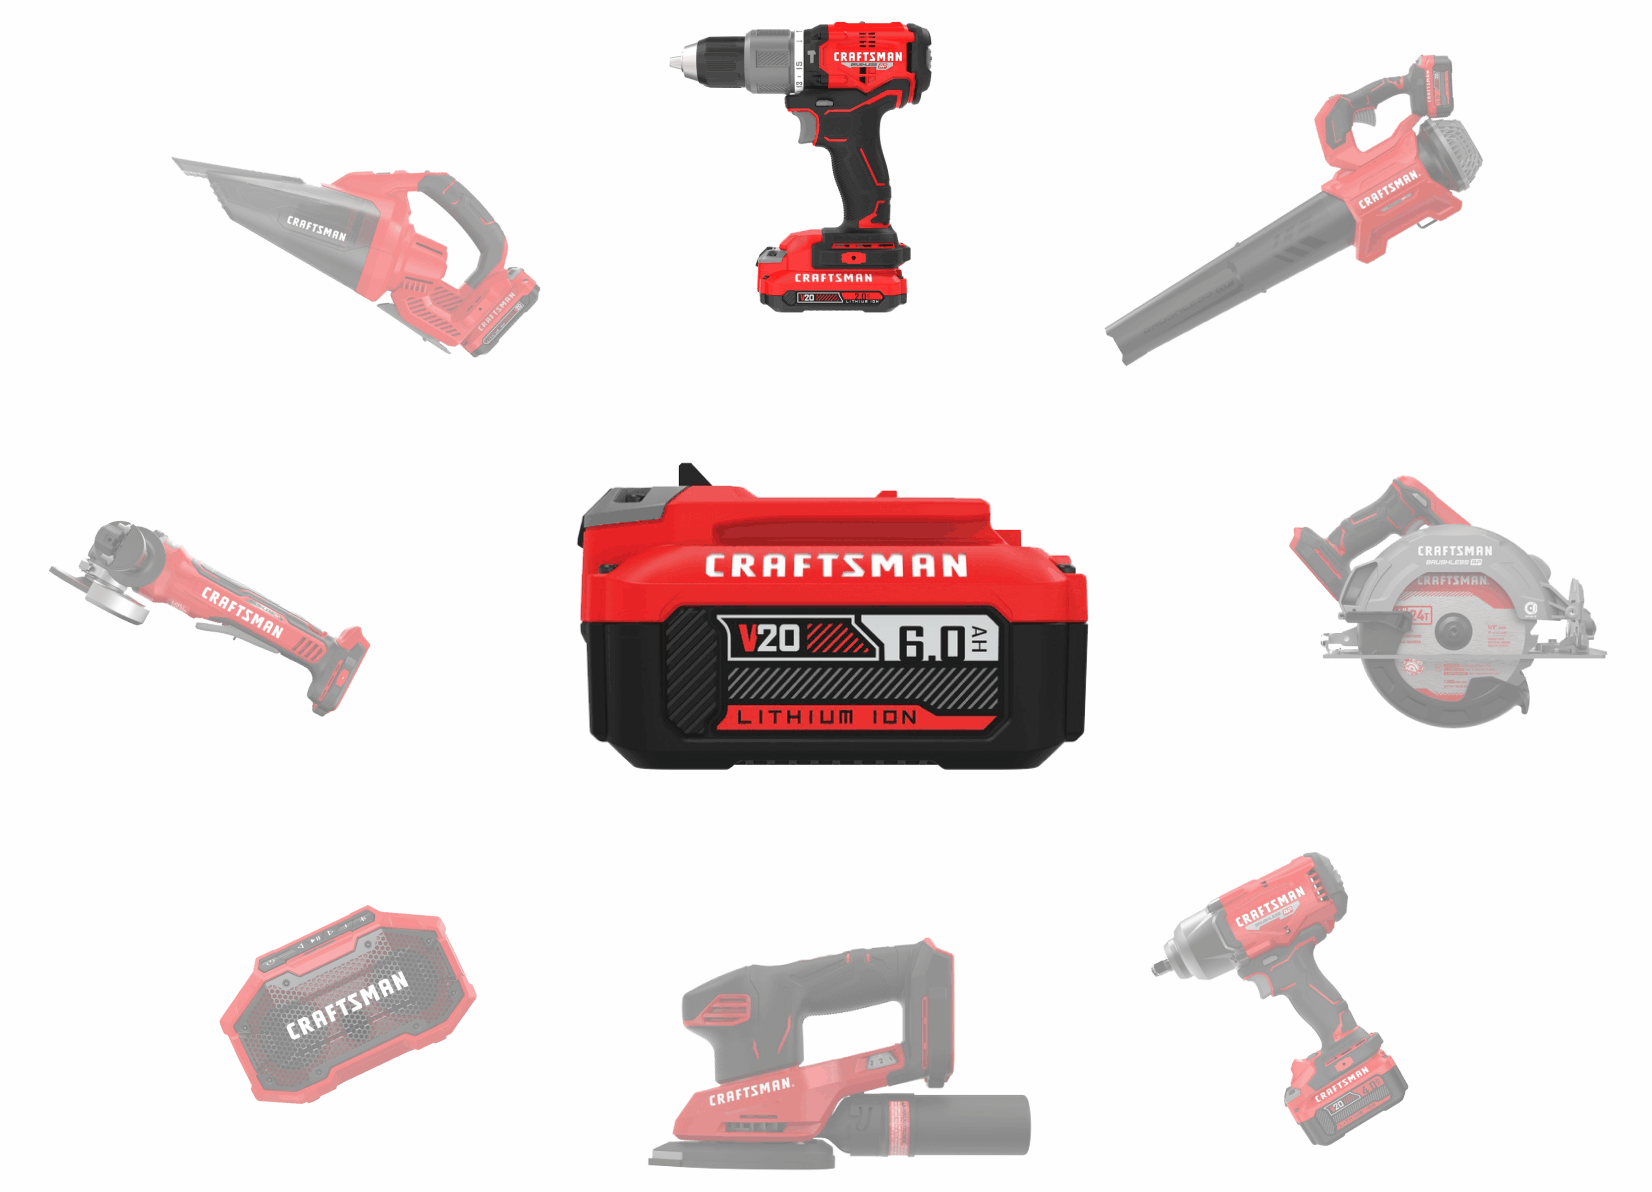 CRAFTSMAN V20* Cordless Impact Wrench, Tool Only (CMCF900B) - 4